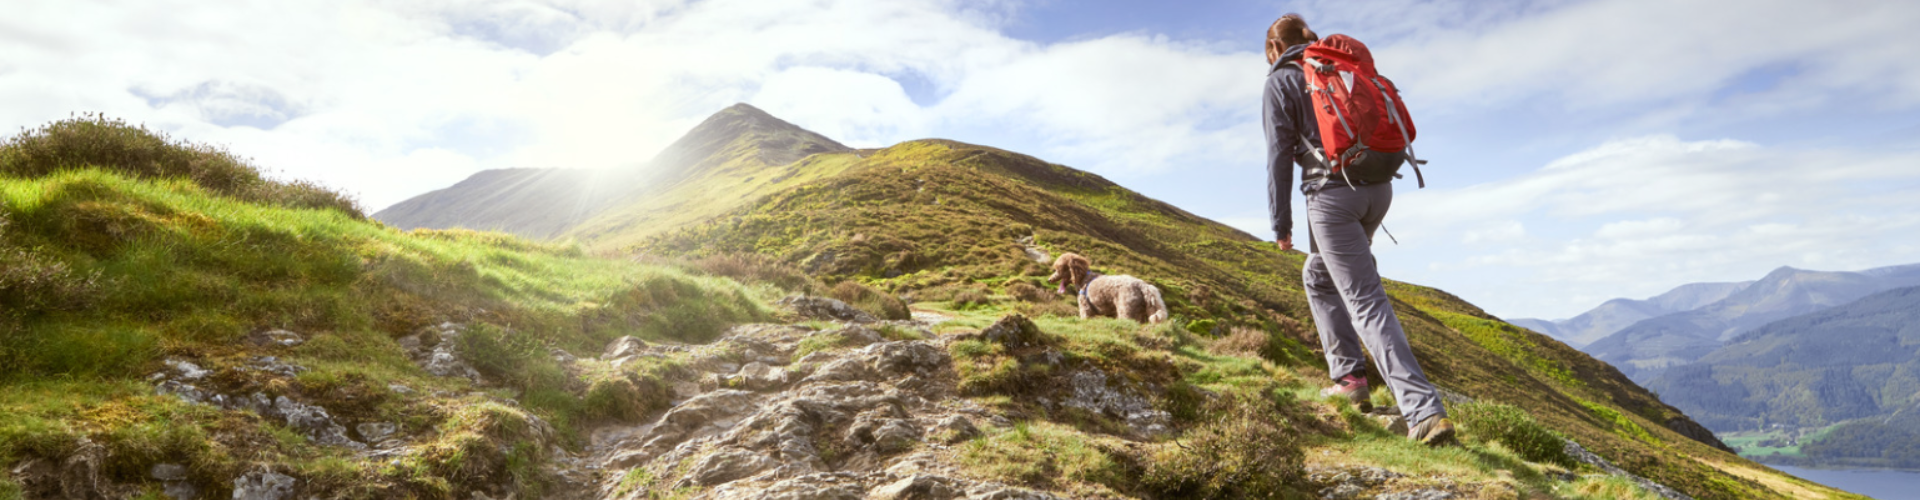 Leeucollection blog - Your Guide to Dog-Friendly Travel in the Lake District hero slide 1